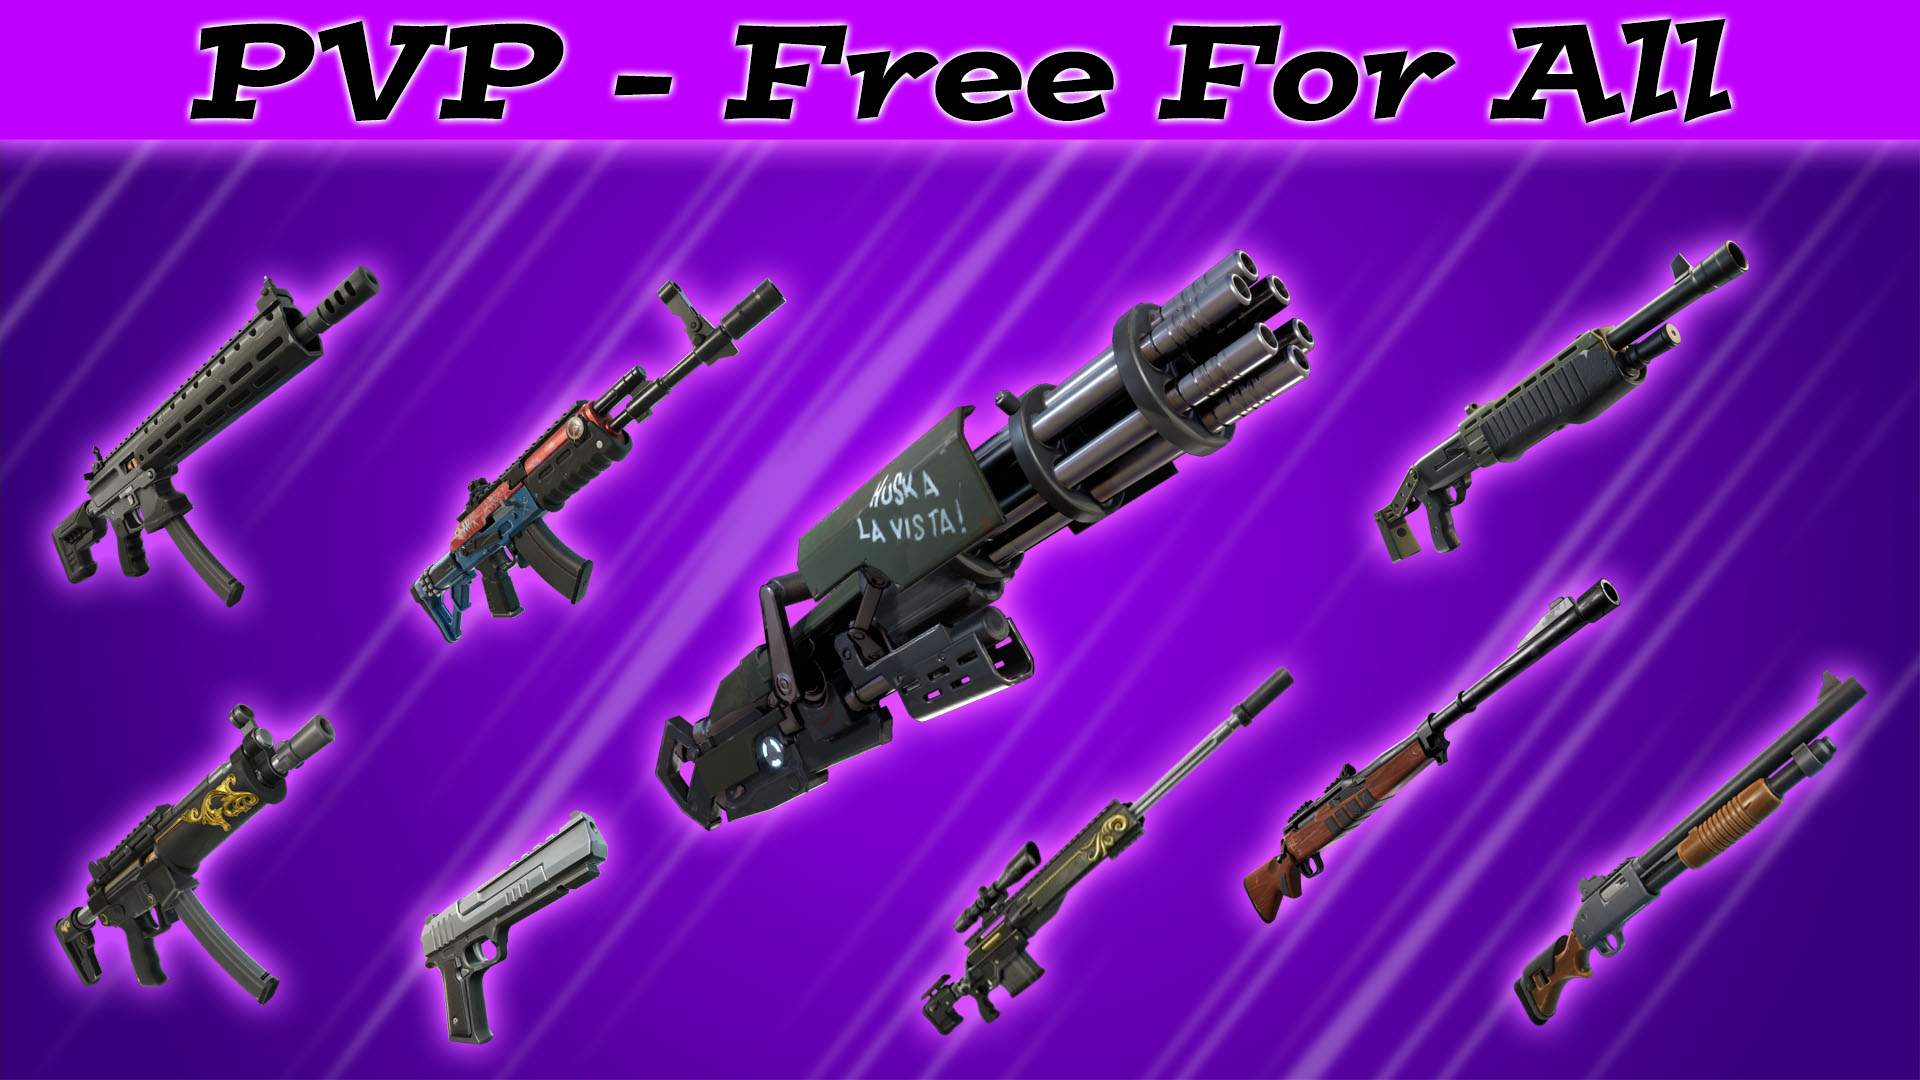 PVP - Free For All